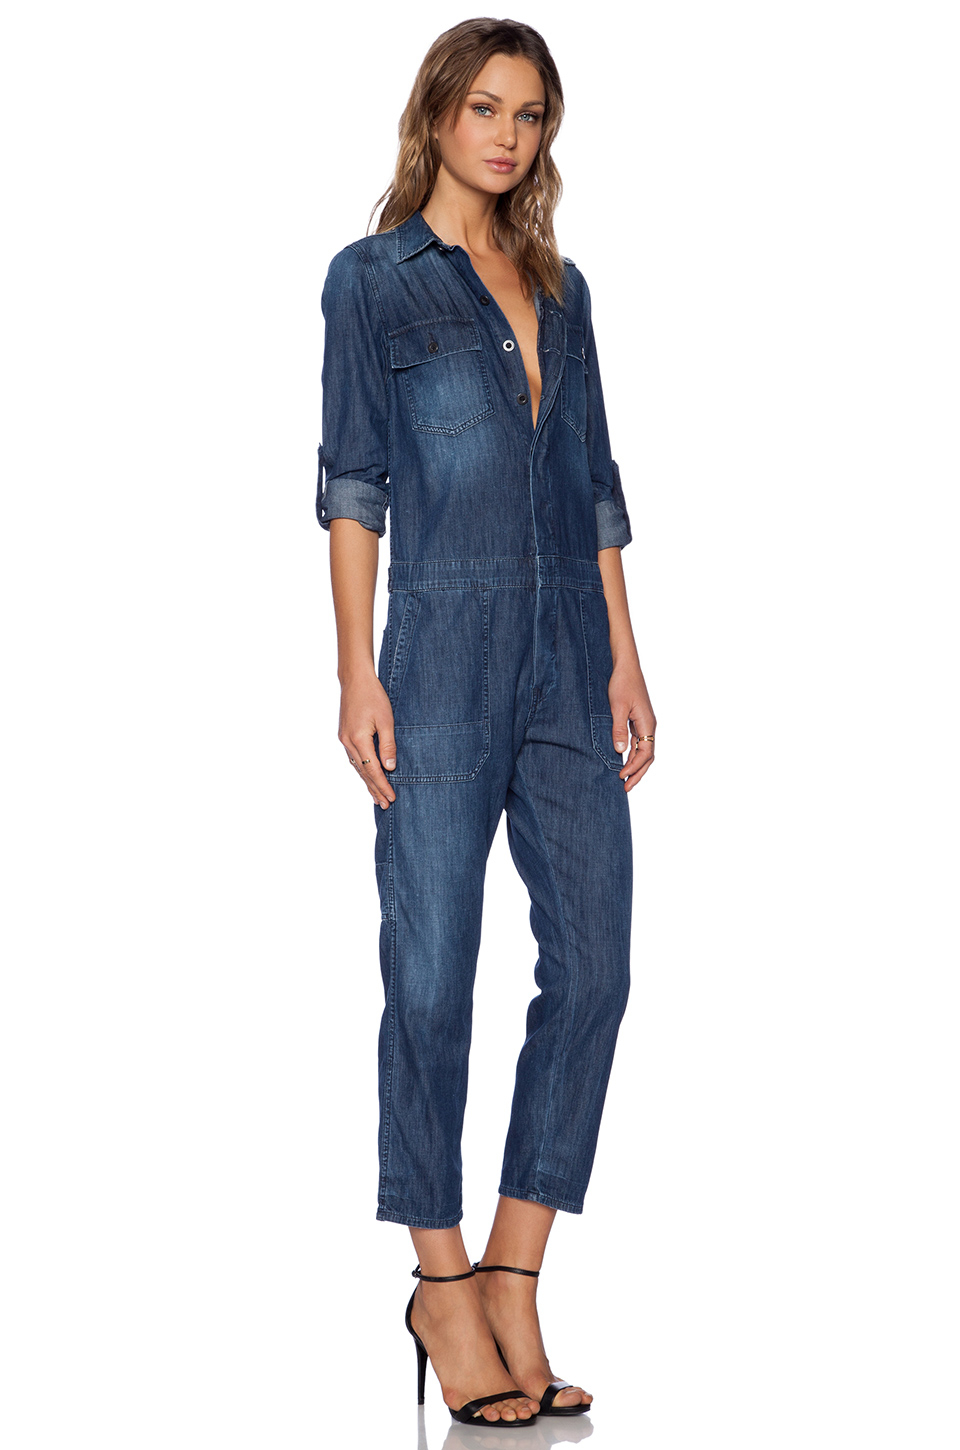 Lyst - Citizens Of Humanity Tallulah Jumpsuit in Blue